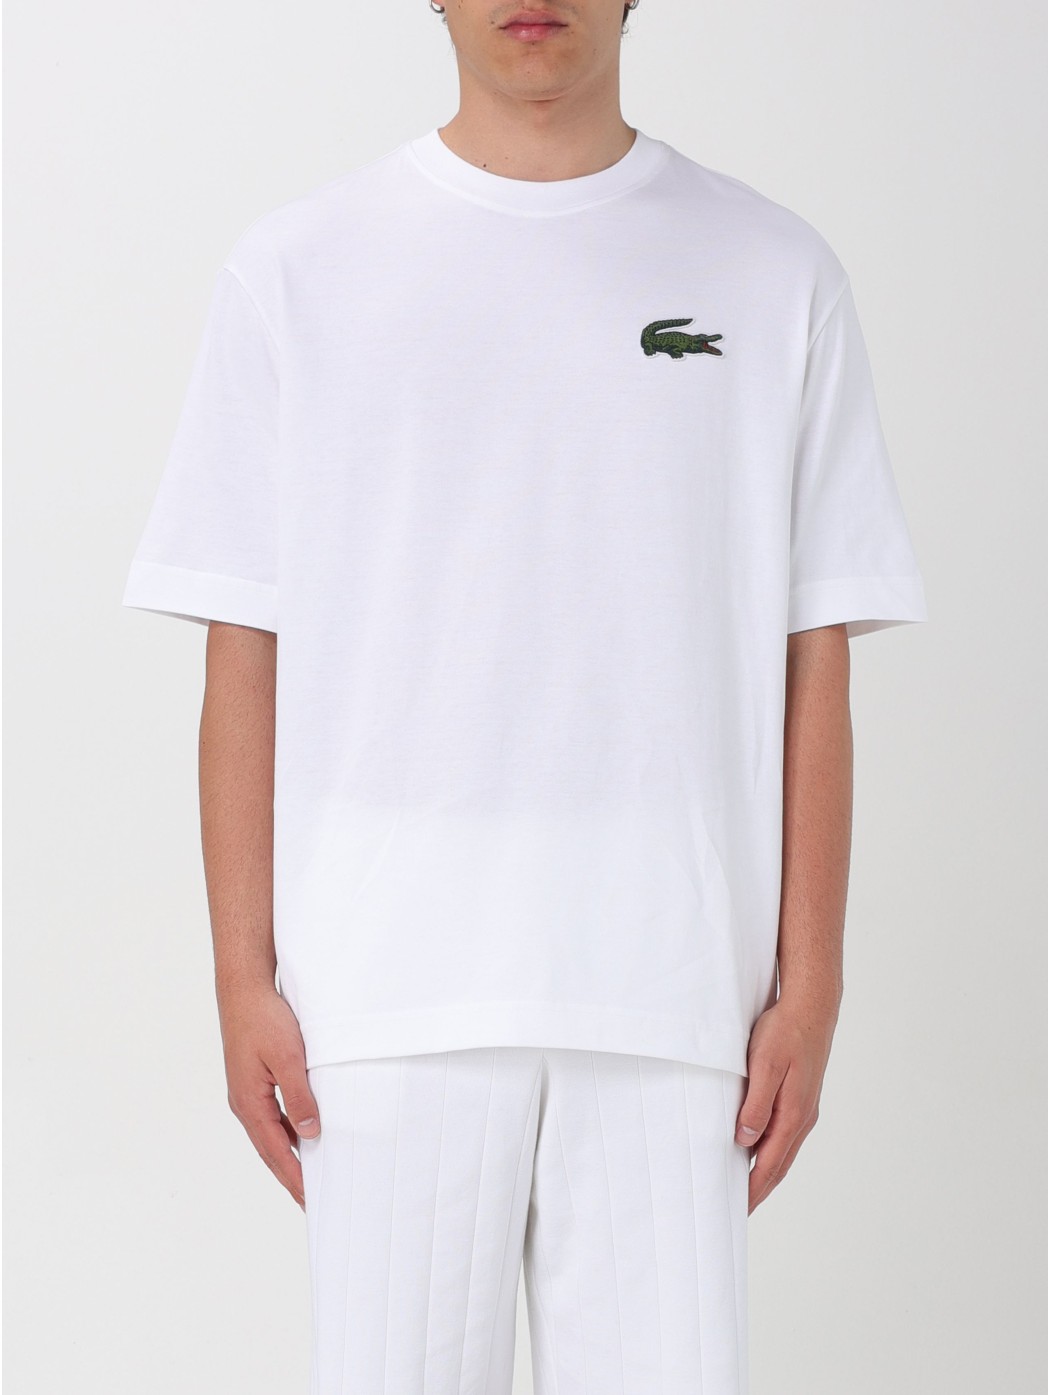 TEE LACOSTE TH0062 001